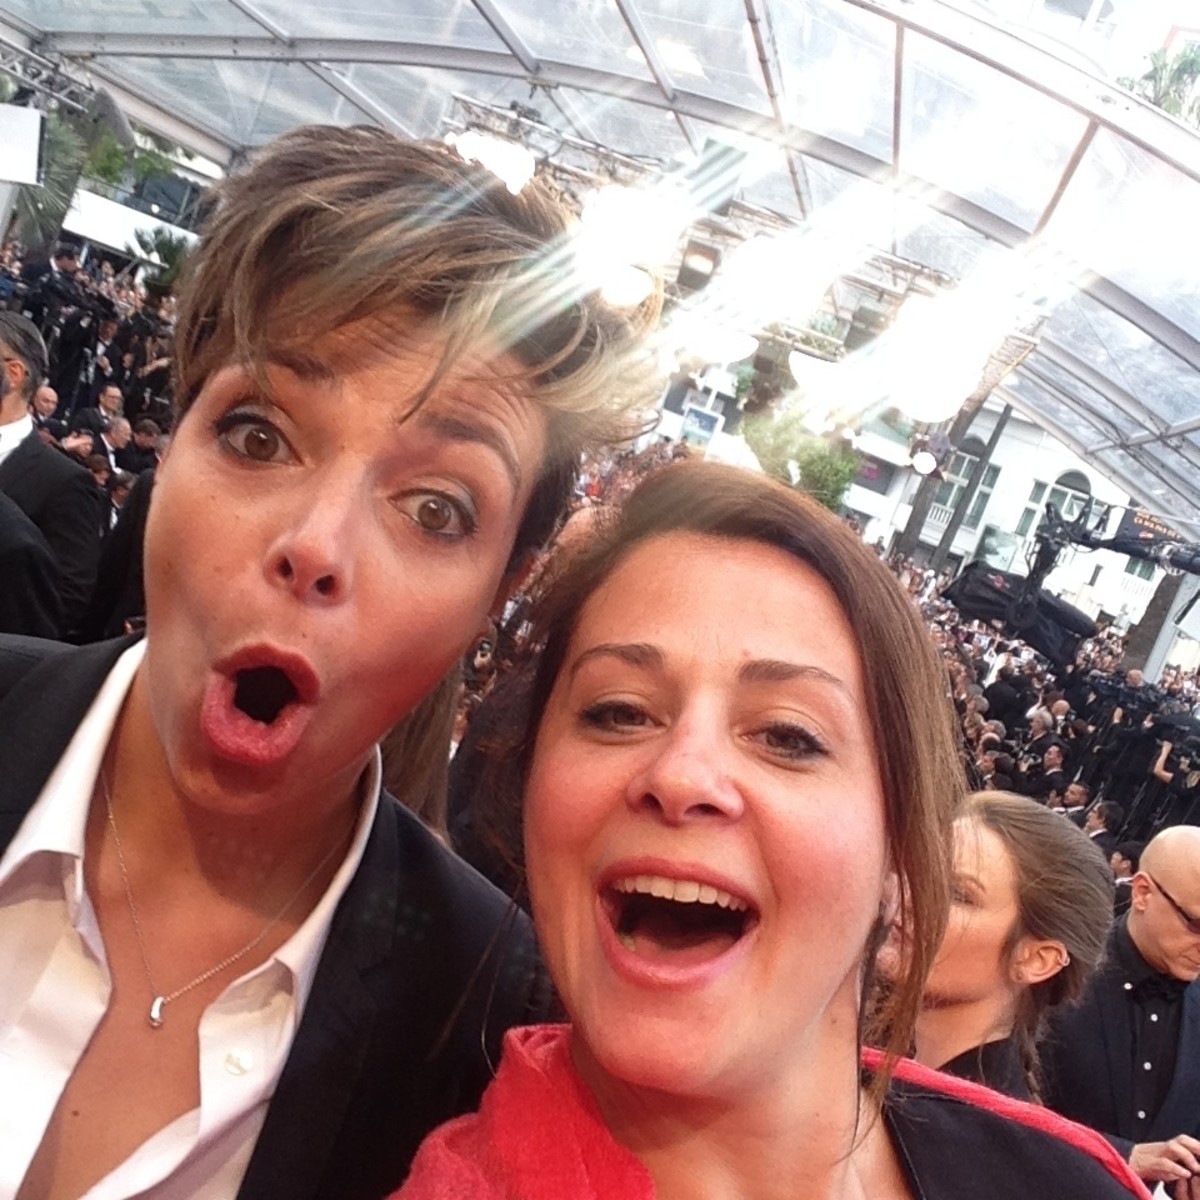 Noémie Lefort and Caroline Maréchal on the red carpet at the Cannes Film Festival